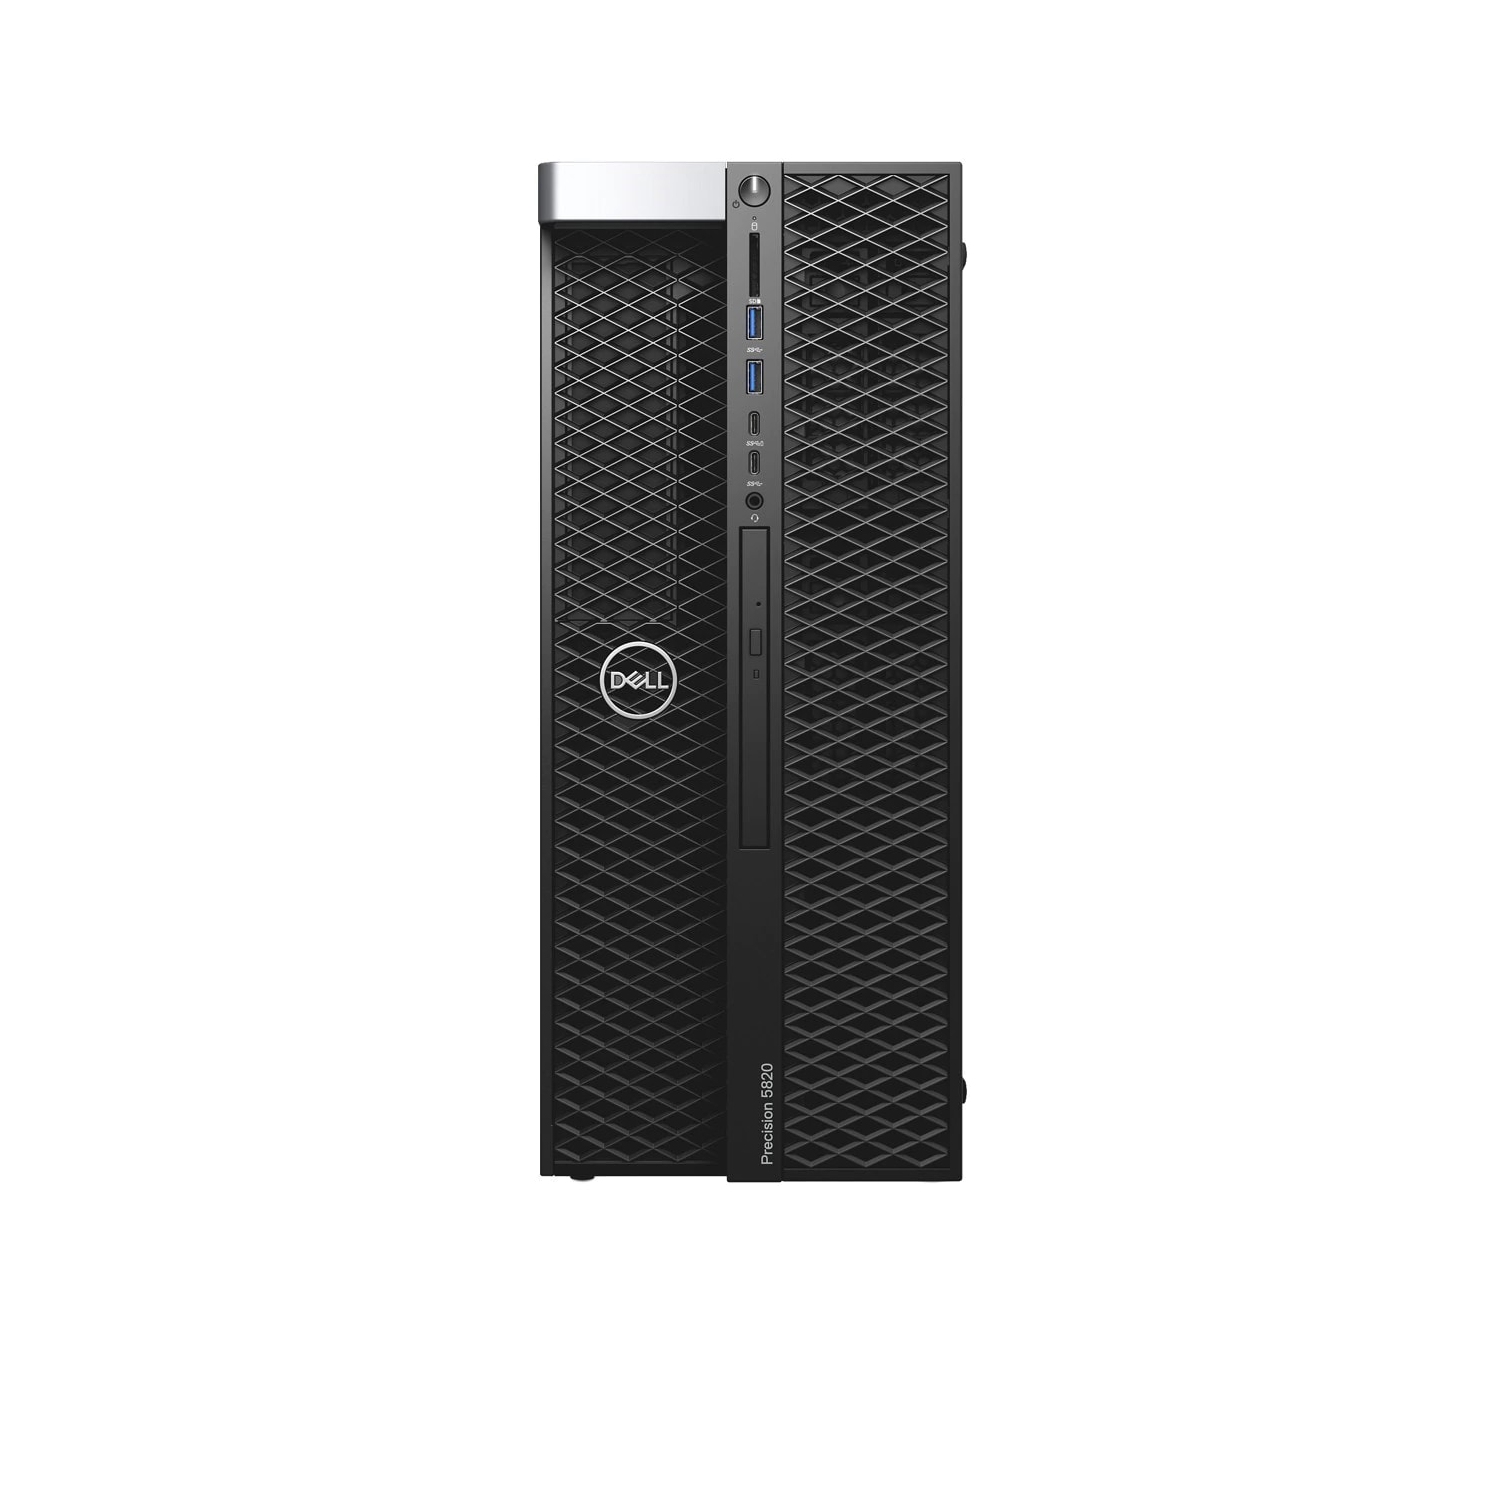 Refurbished (Excellent) - Dell Precision T5820 Workstation Desktop (2018), Core i9, 1TB HDD, 64GB RAM, Quadro P2200, 10 Cores @ 4.5 GHz, 10th Gen CPU Certified